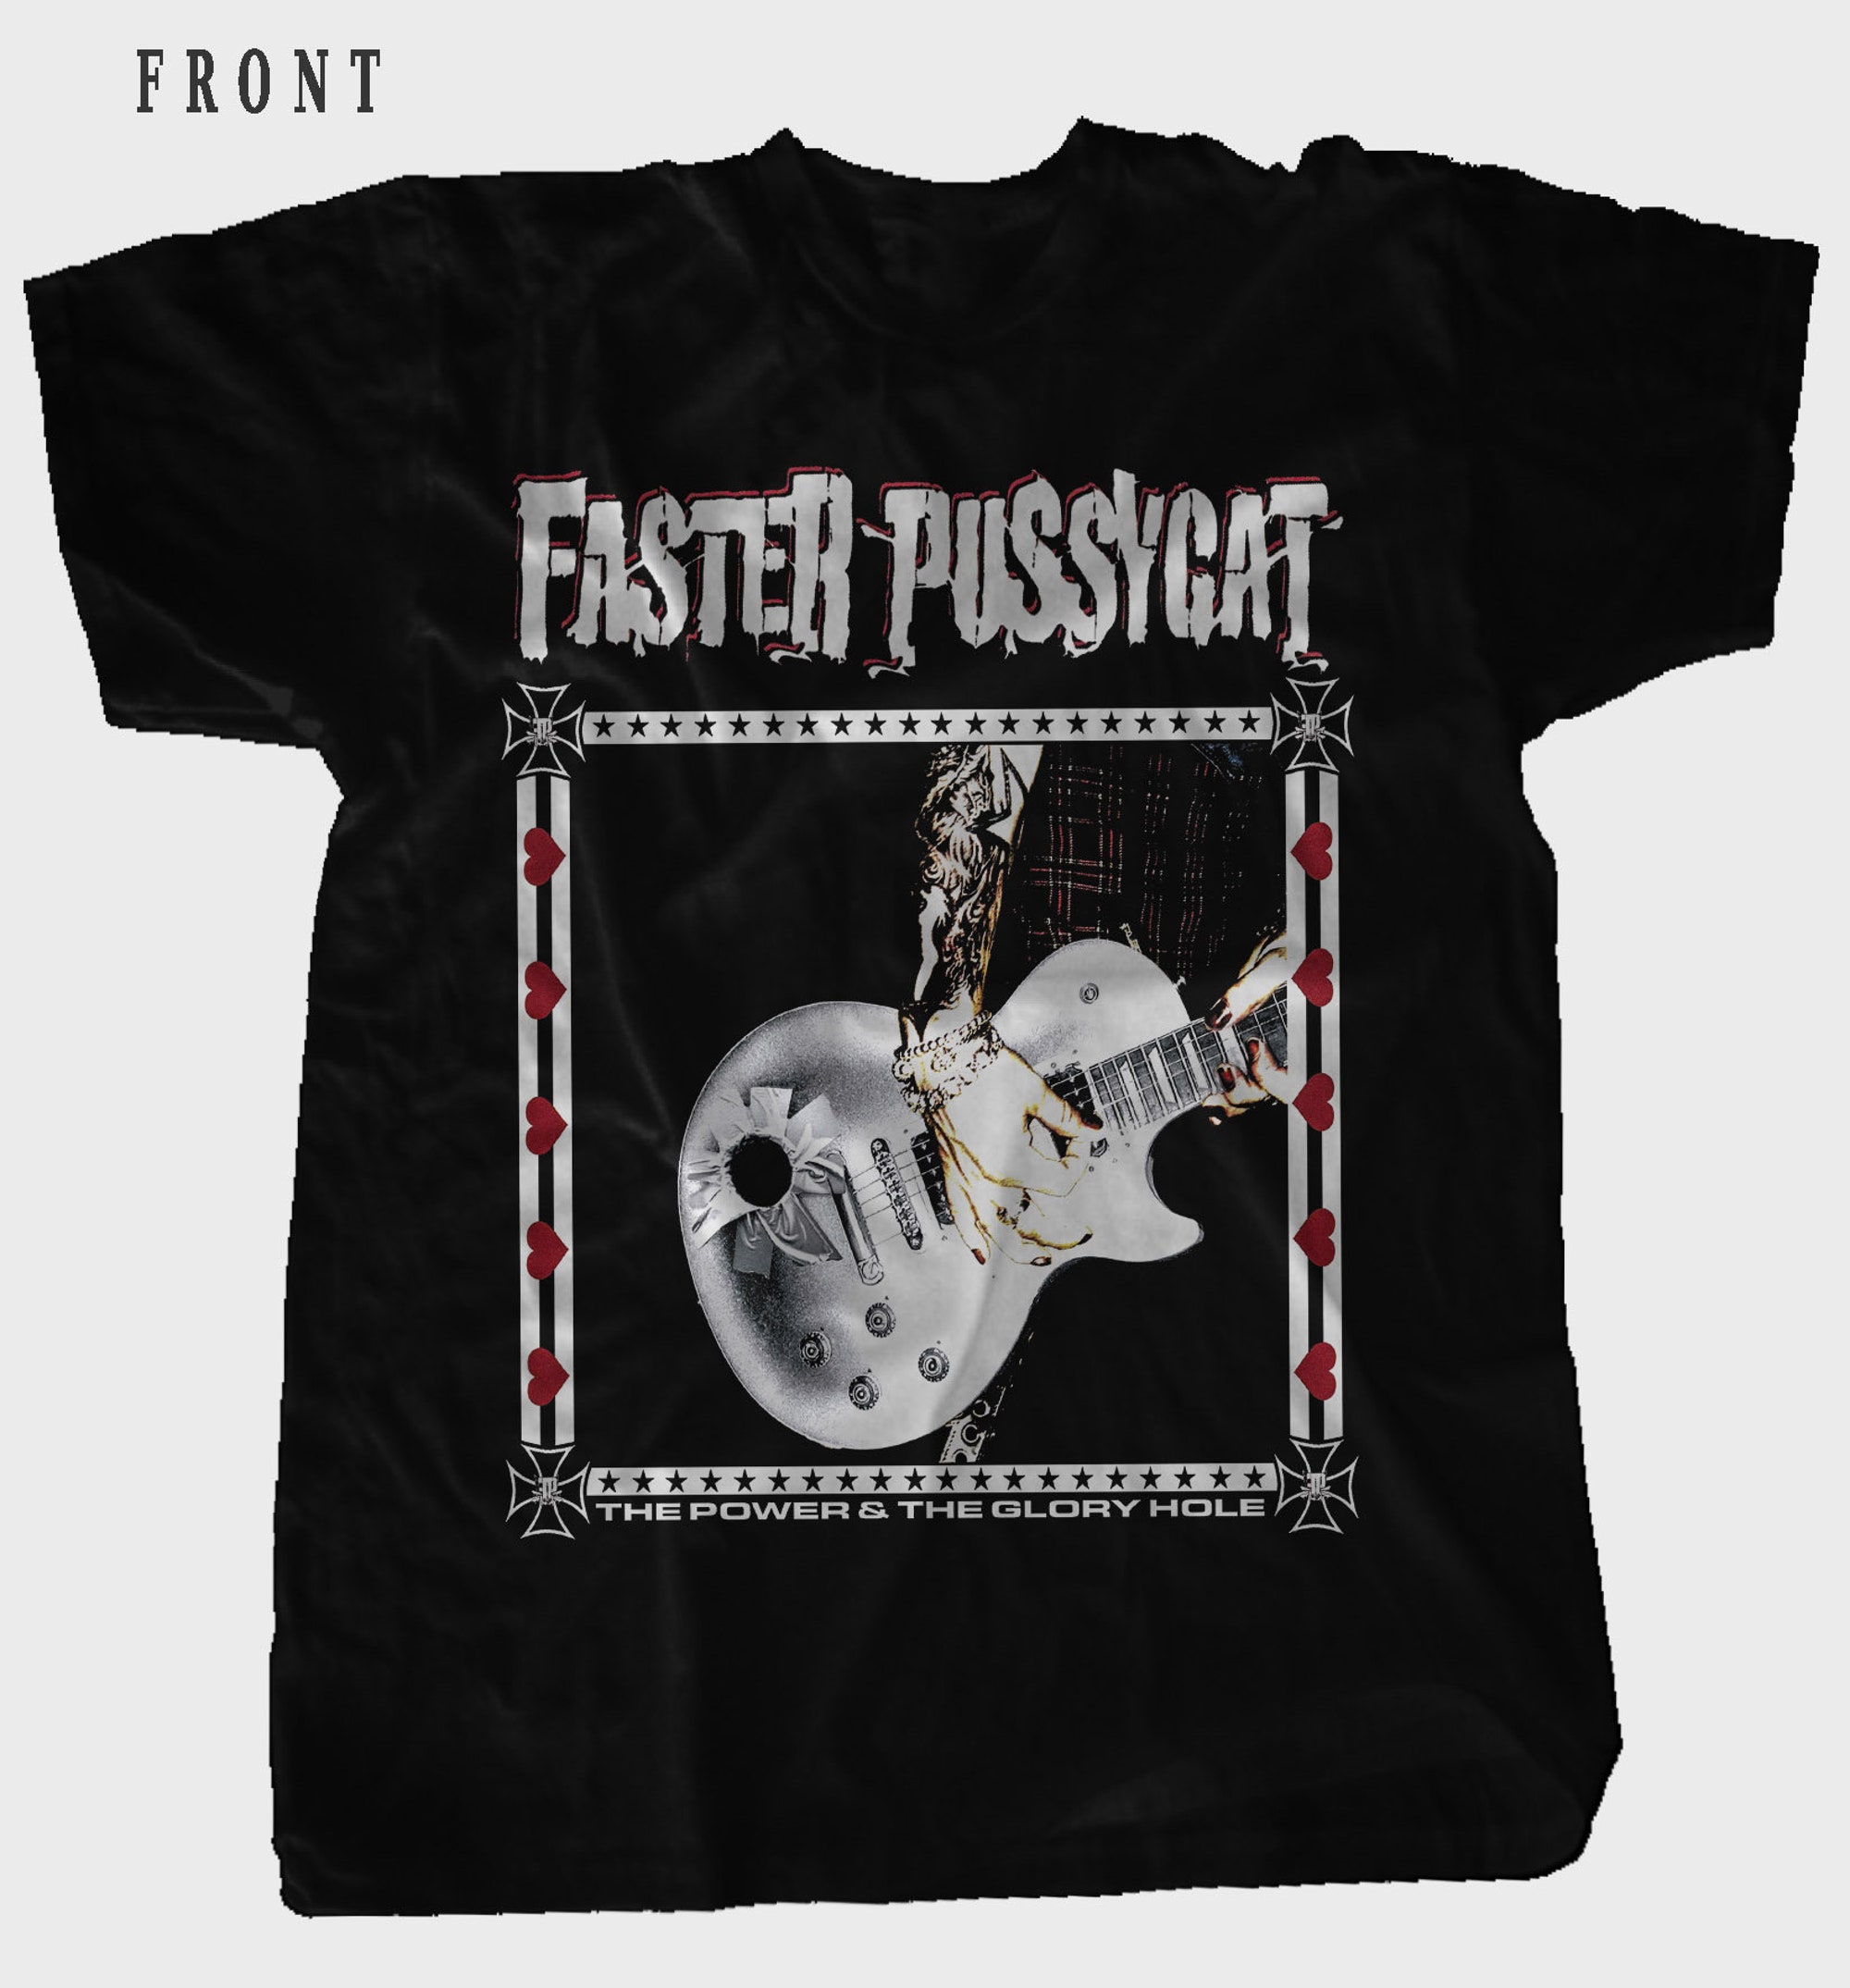 Faster Pussycat - The Power and the Glory Hole t-shirt